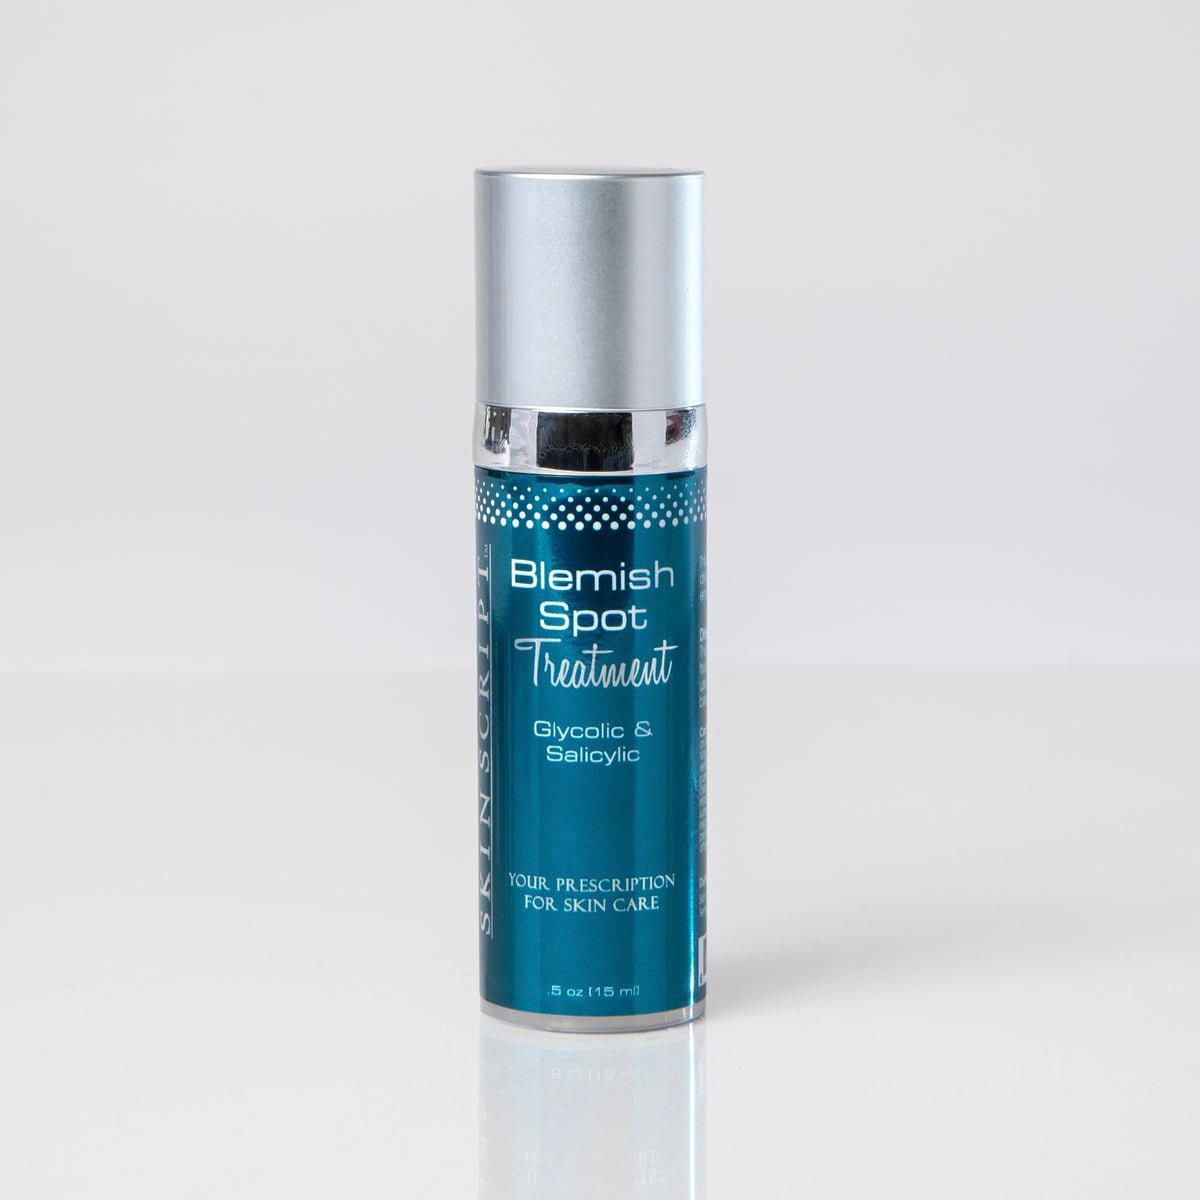 The Blemish Spot Treatment is a spot treatment to clear the pores and alleviate breakouts.